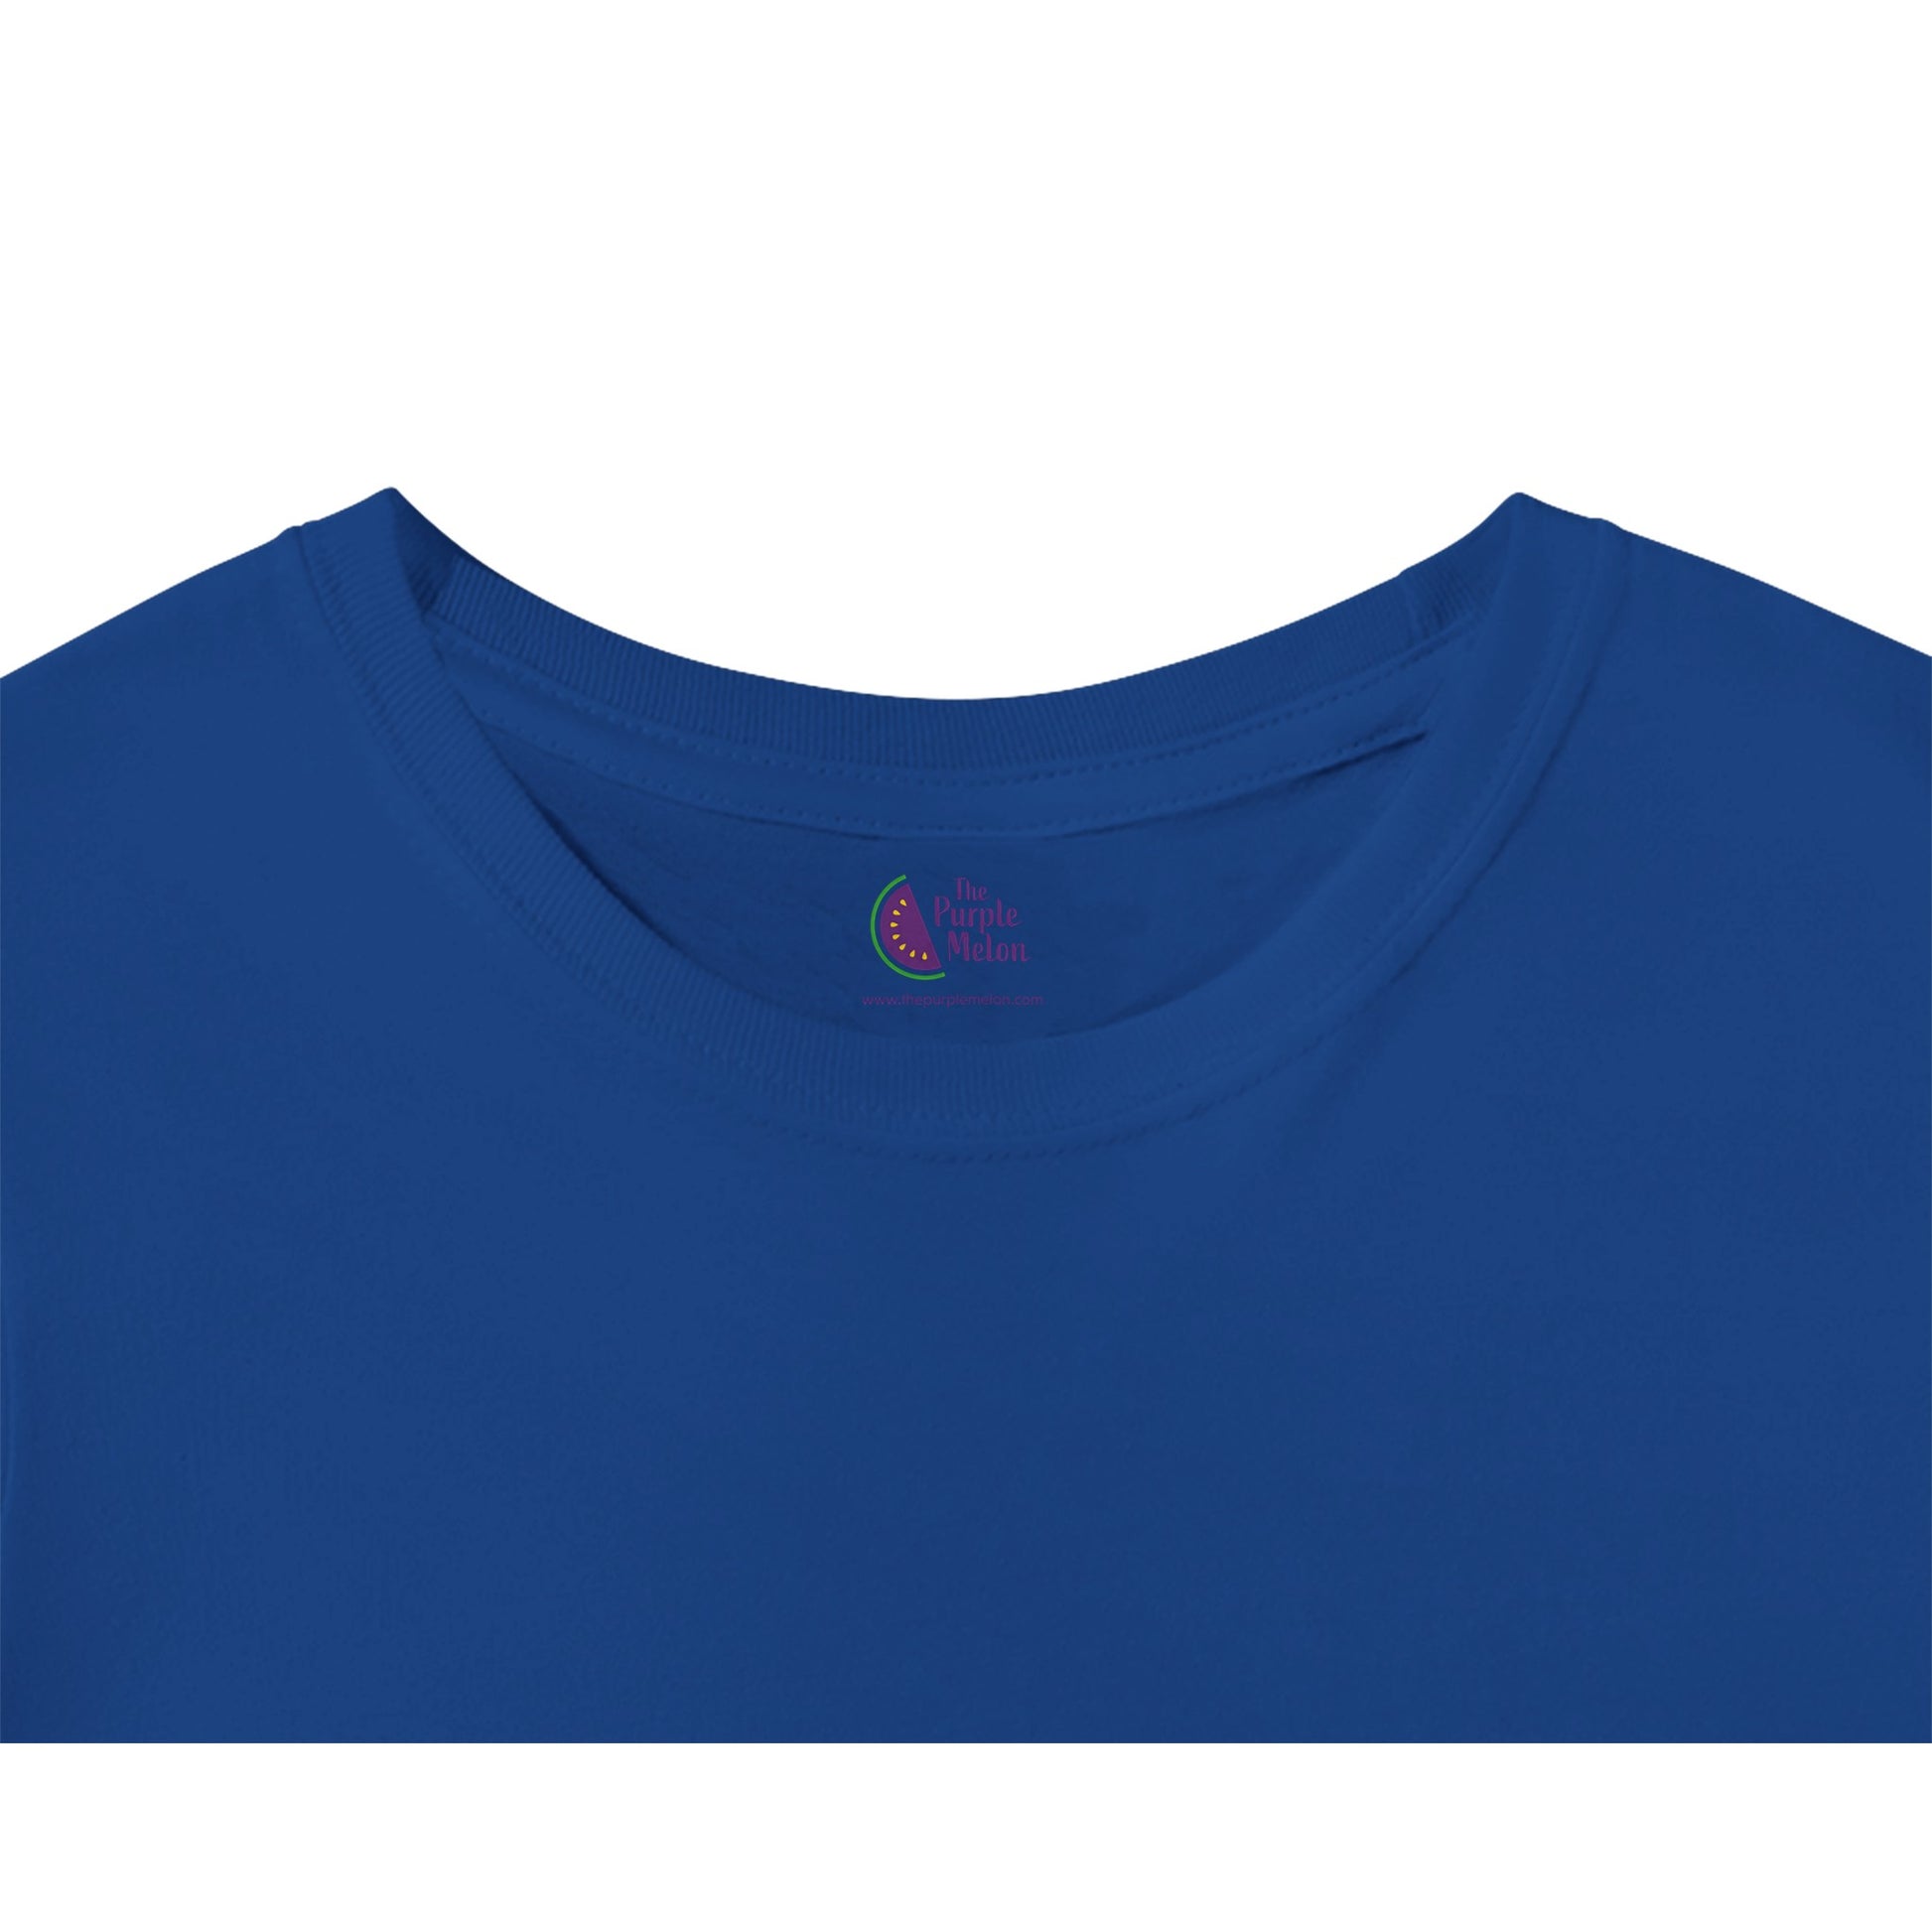 Rotal blue t-shirt neck label with the purple melon logo